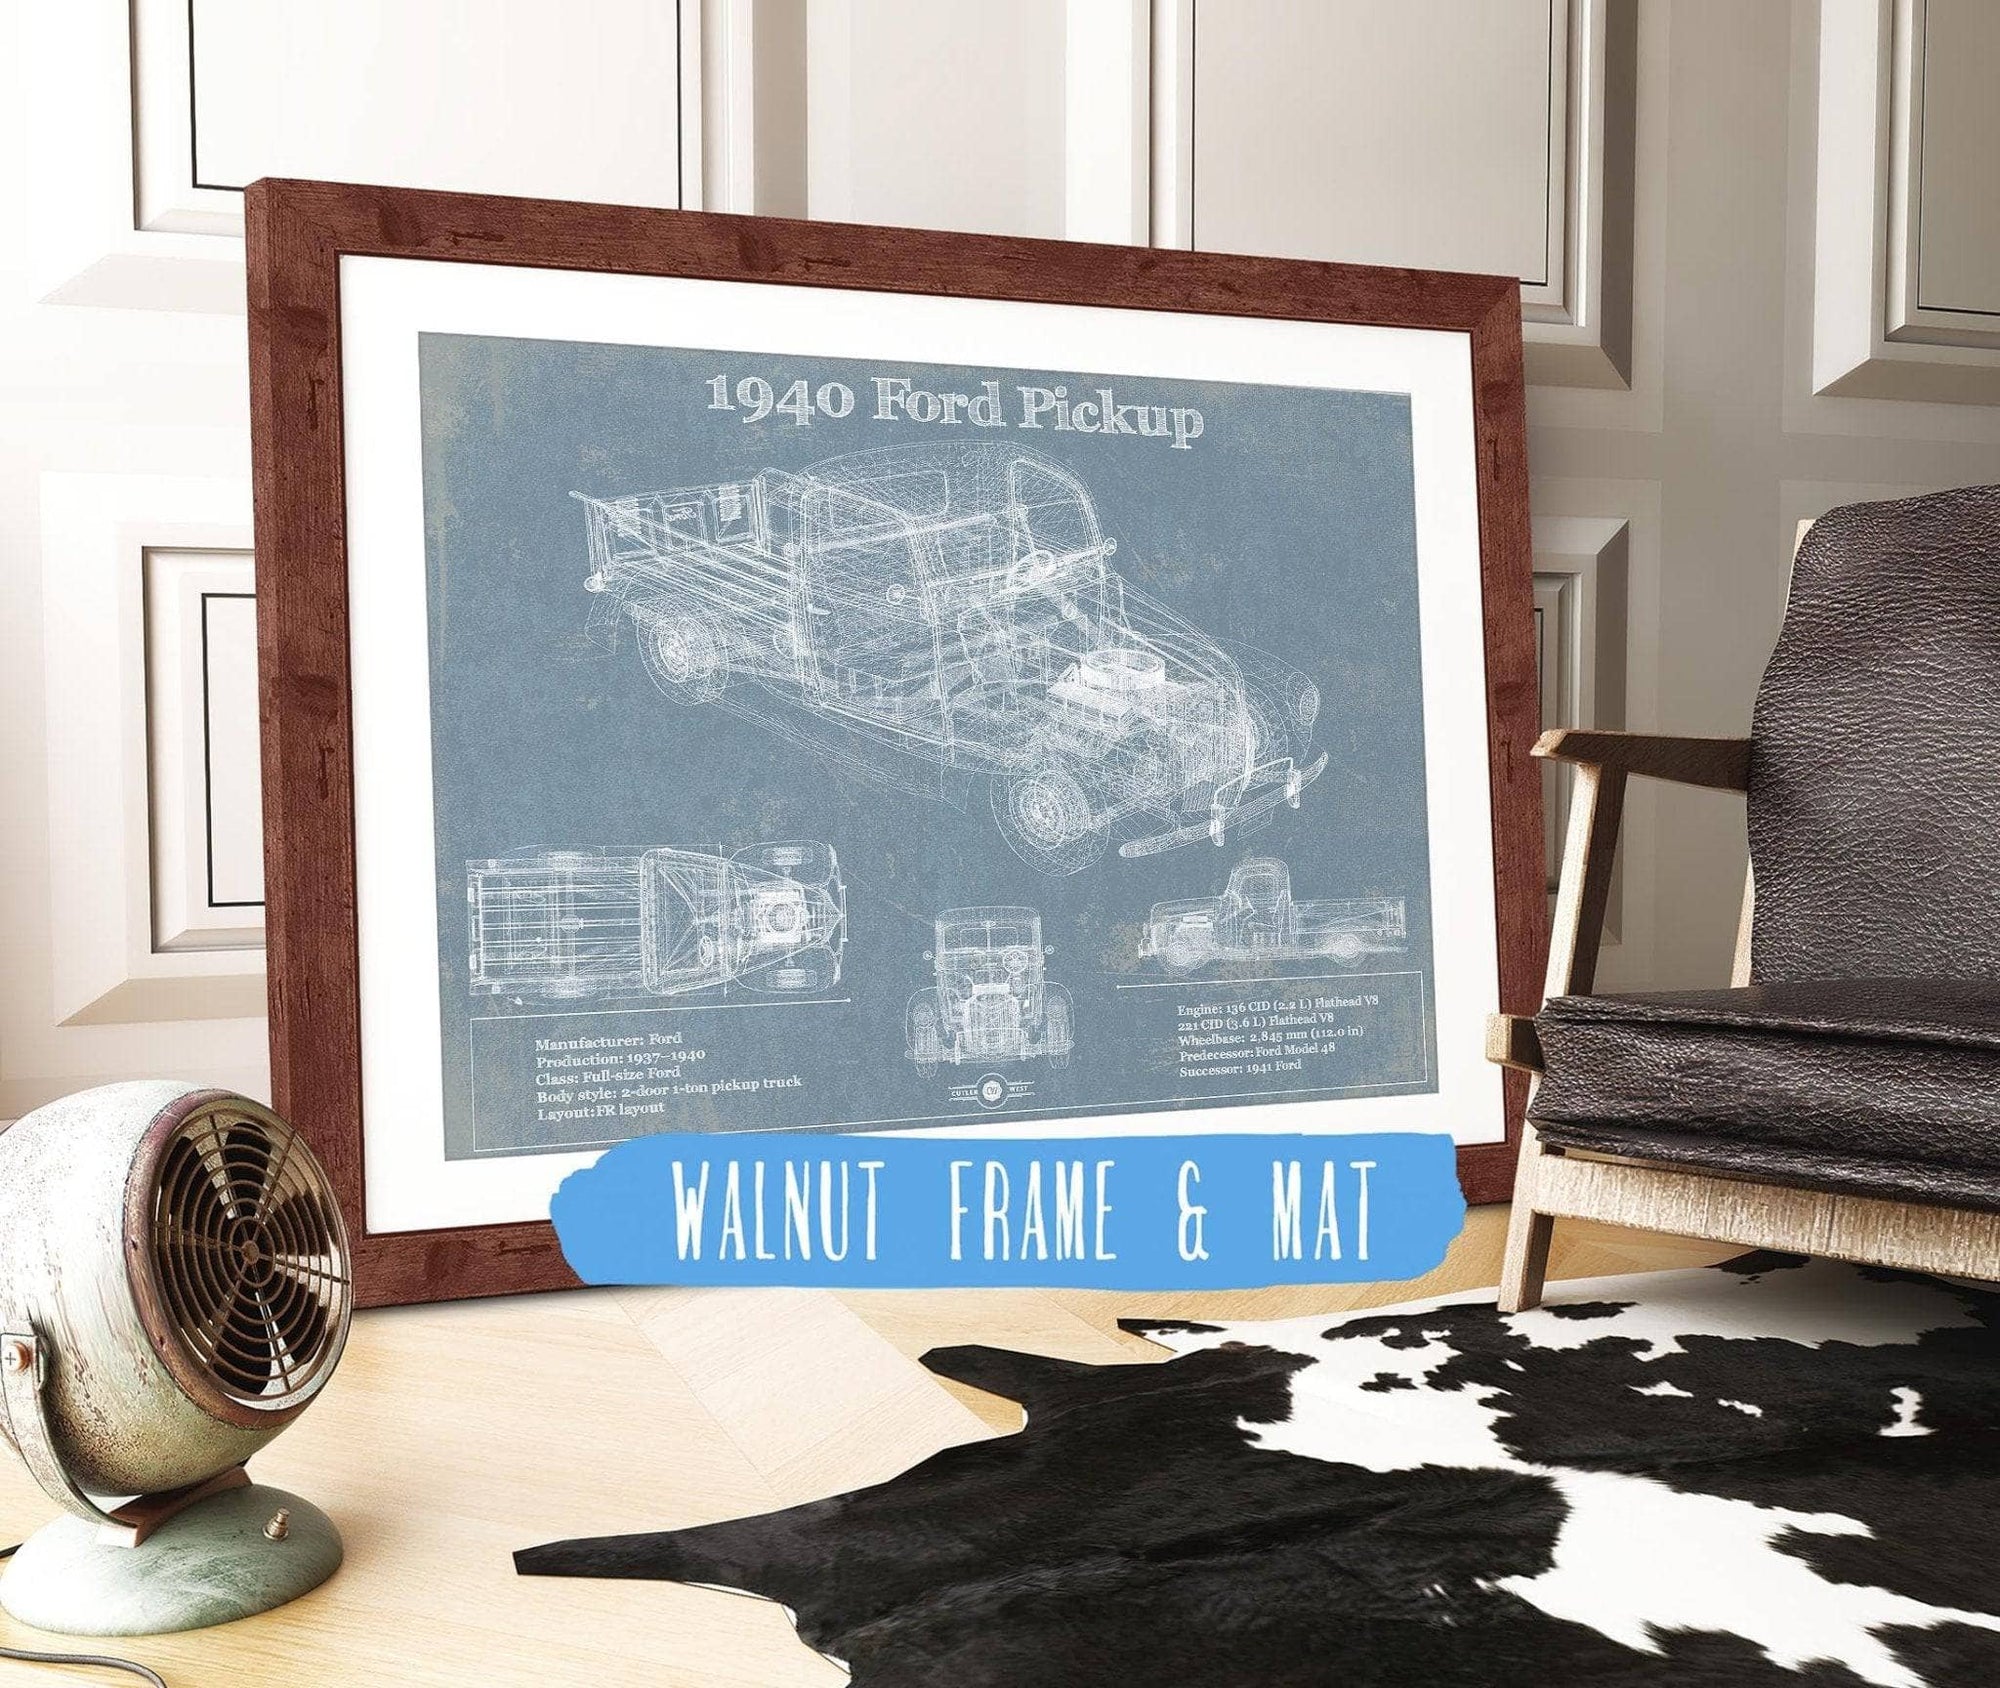 Cutler West Ford Collection 14" x 11" / Walnut Frame & Mat 1940 Ford Pickup Vintage Blueprint Auto Print 933311093_15636